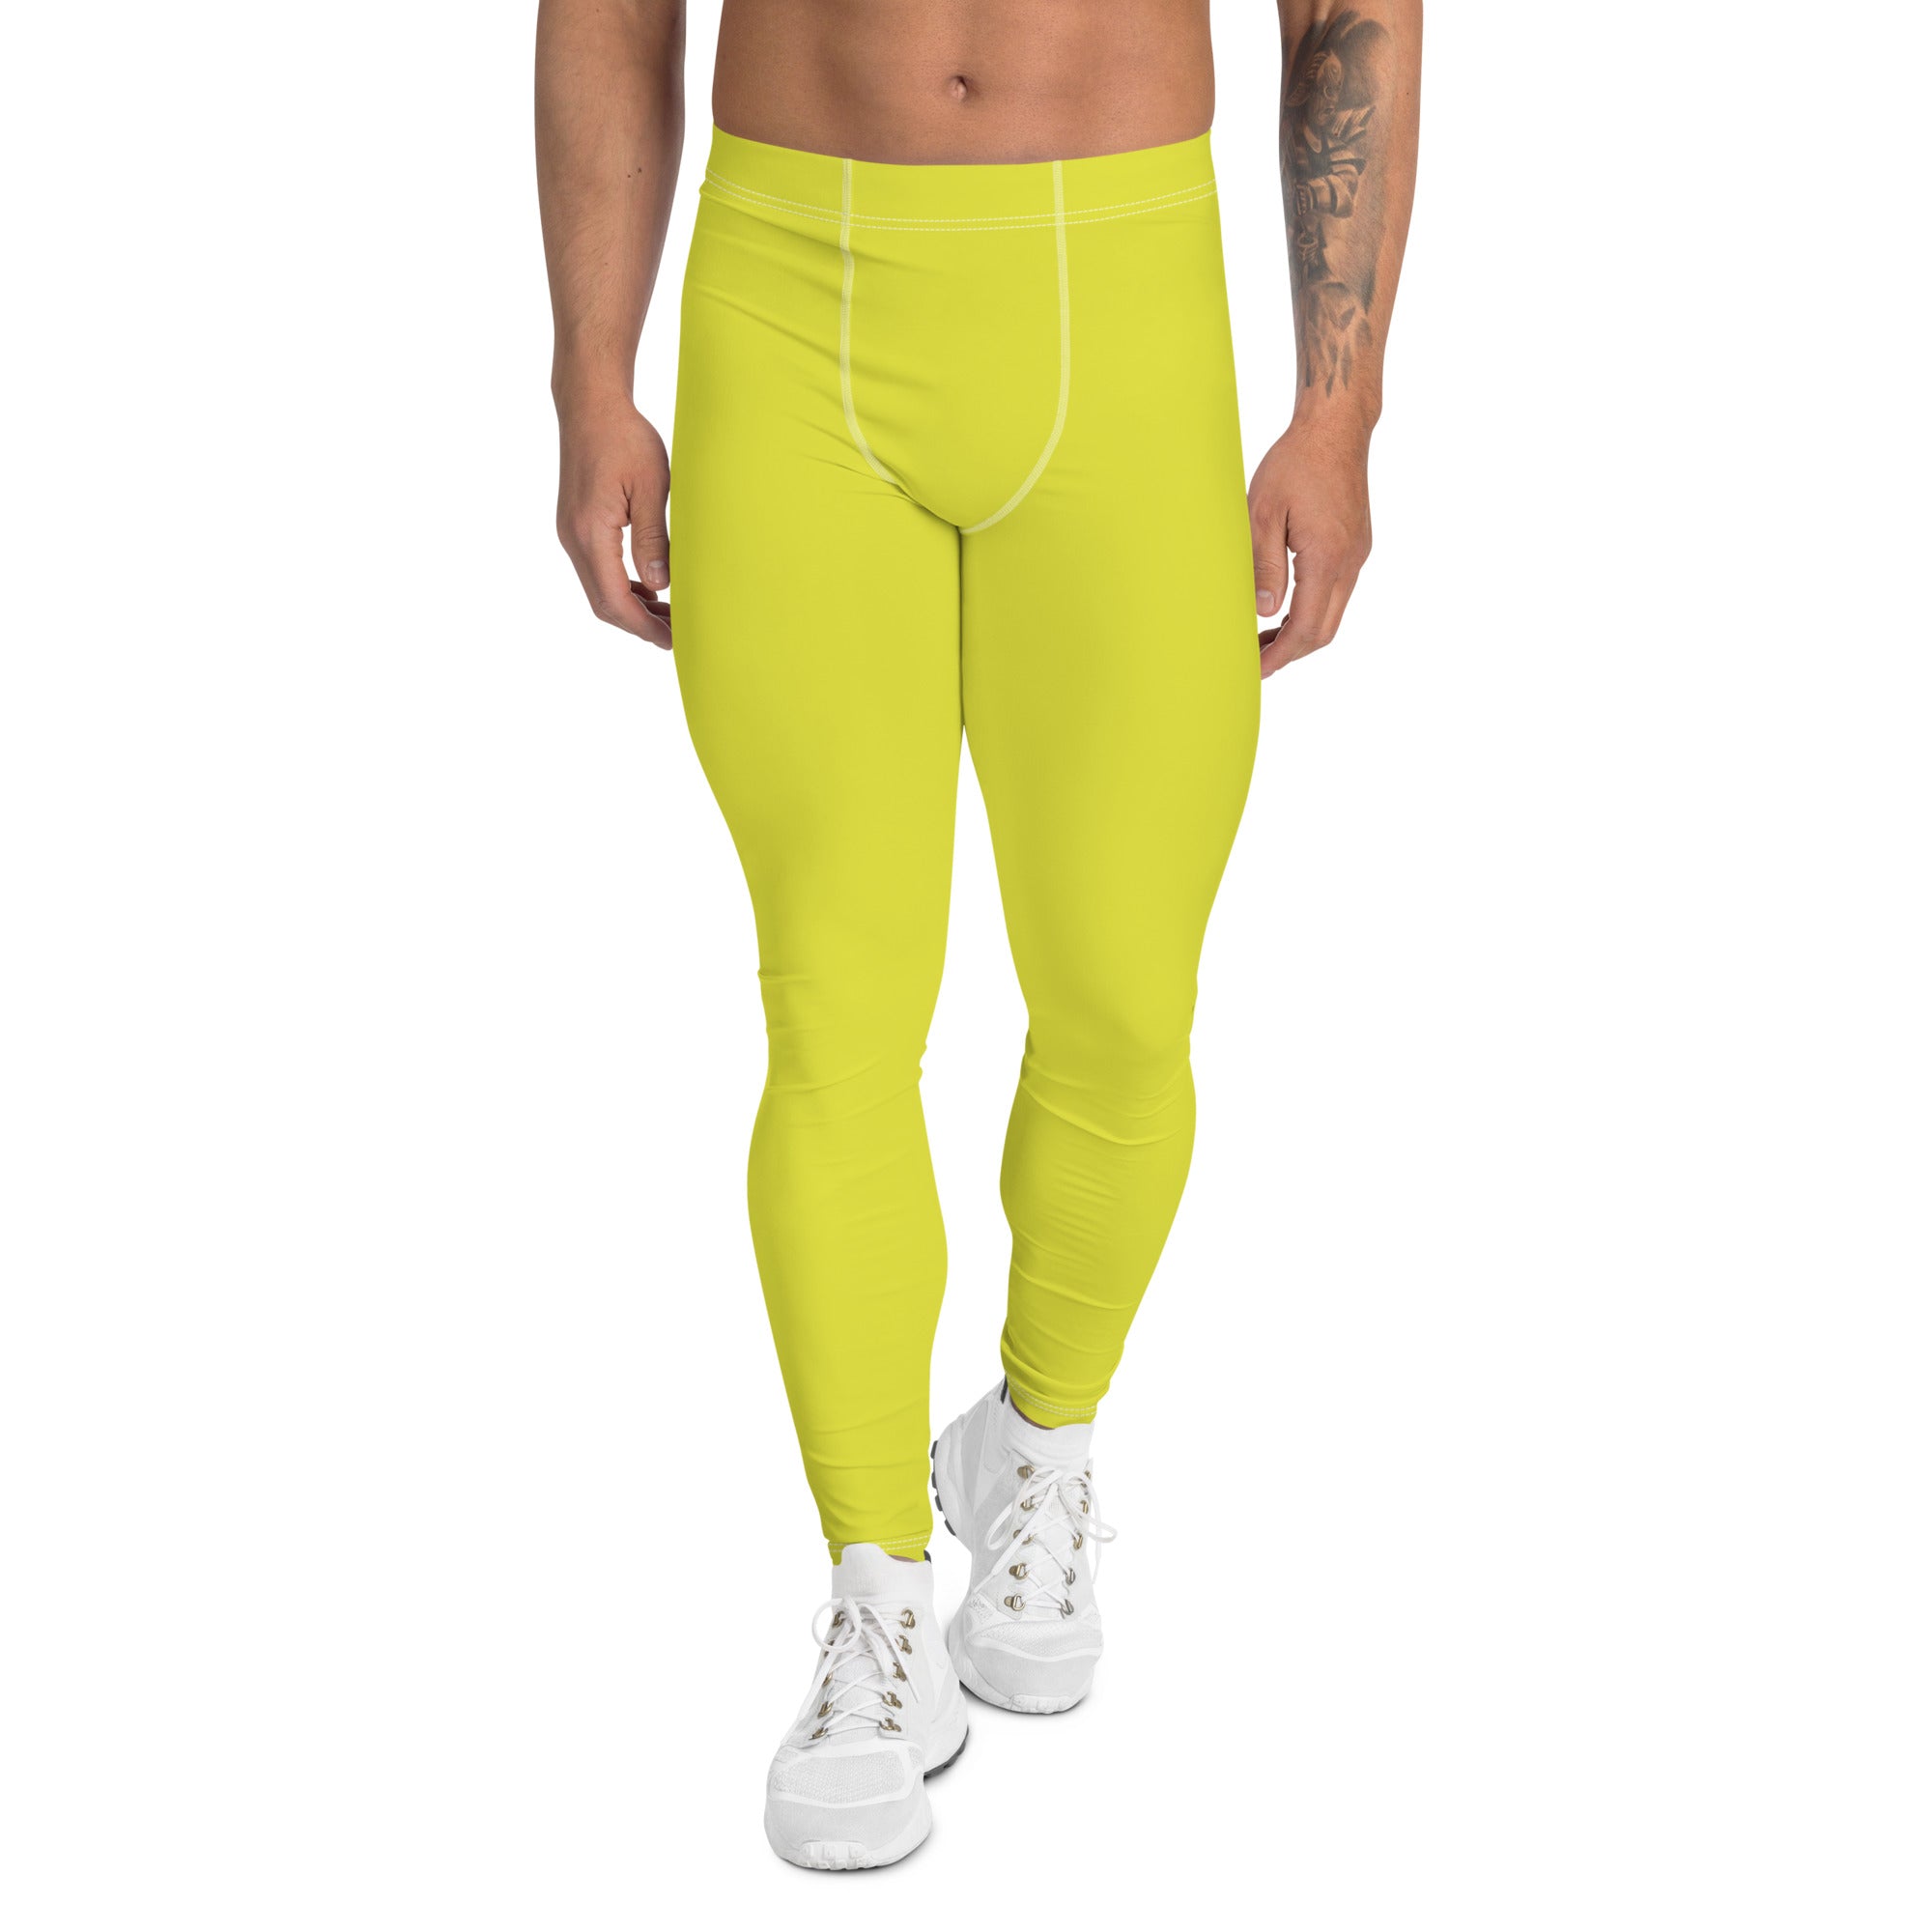 Yellow Solid Color Men's Leggings, Solid Lemon Bright Yellow Color Men's Tights  Compression Pants - Made in USA/EU/MX